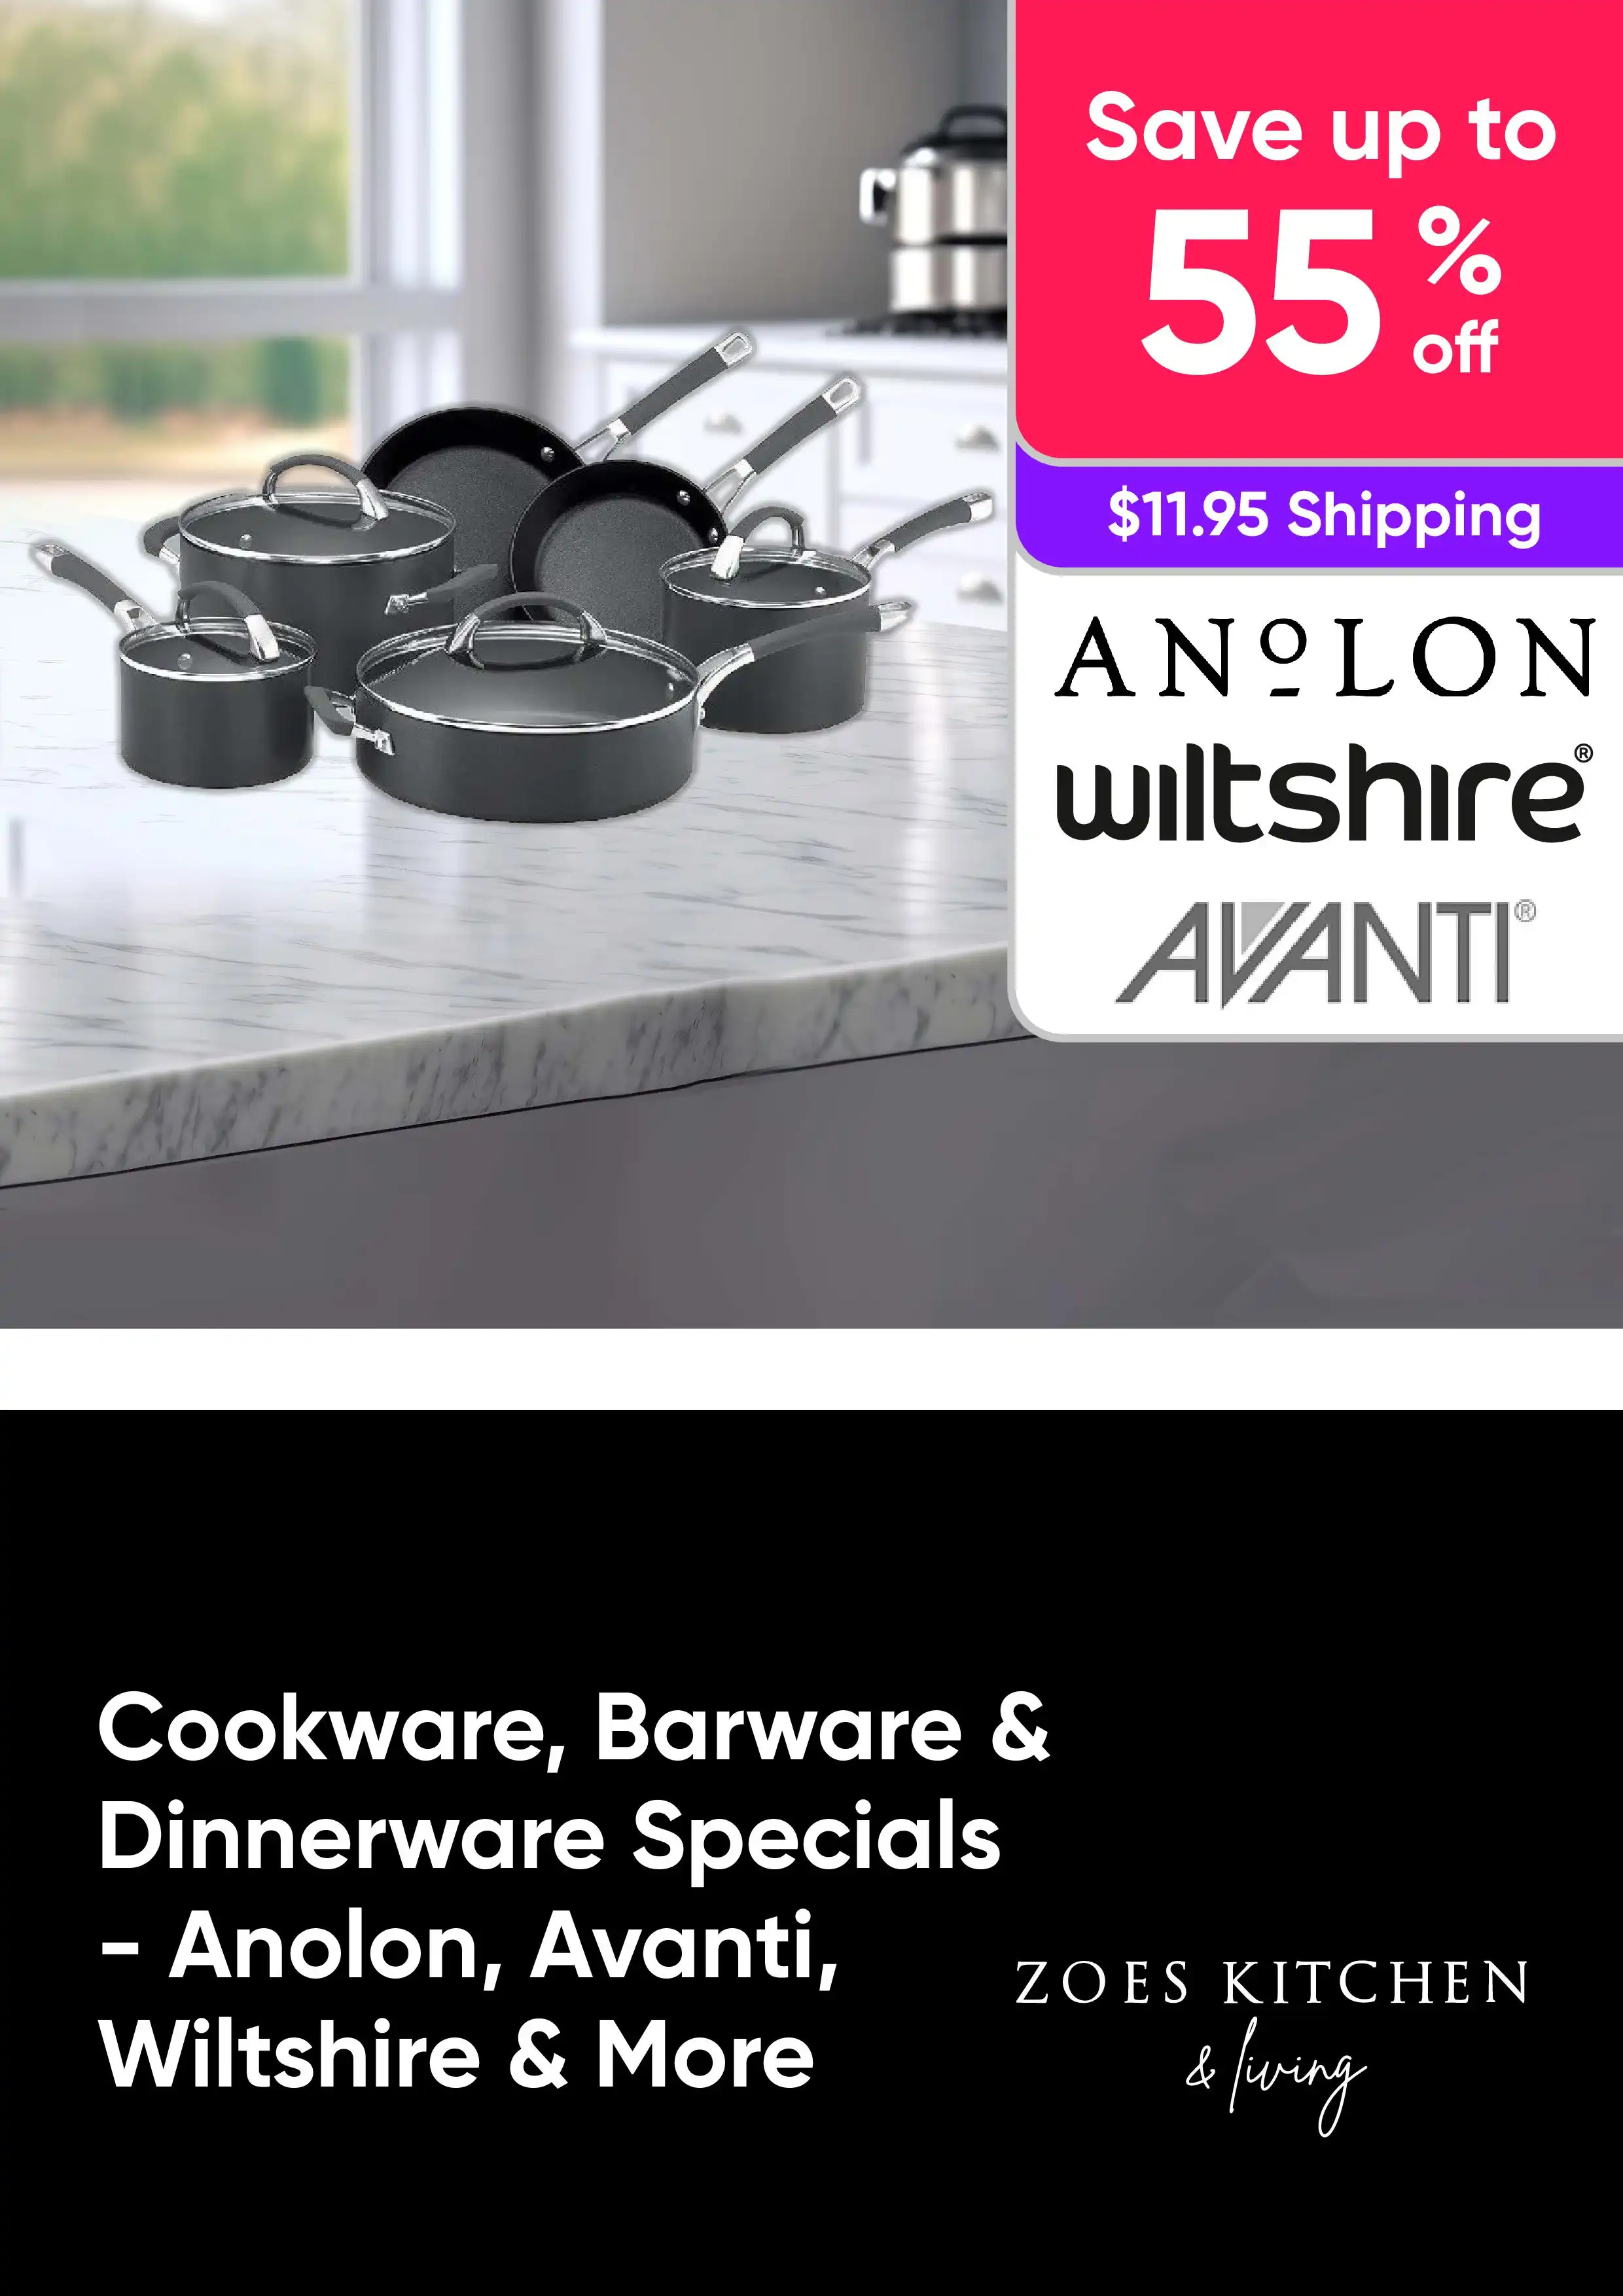 Shop Specials on Cookware, Barware, Dinnerware - Save Up to 55%